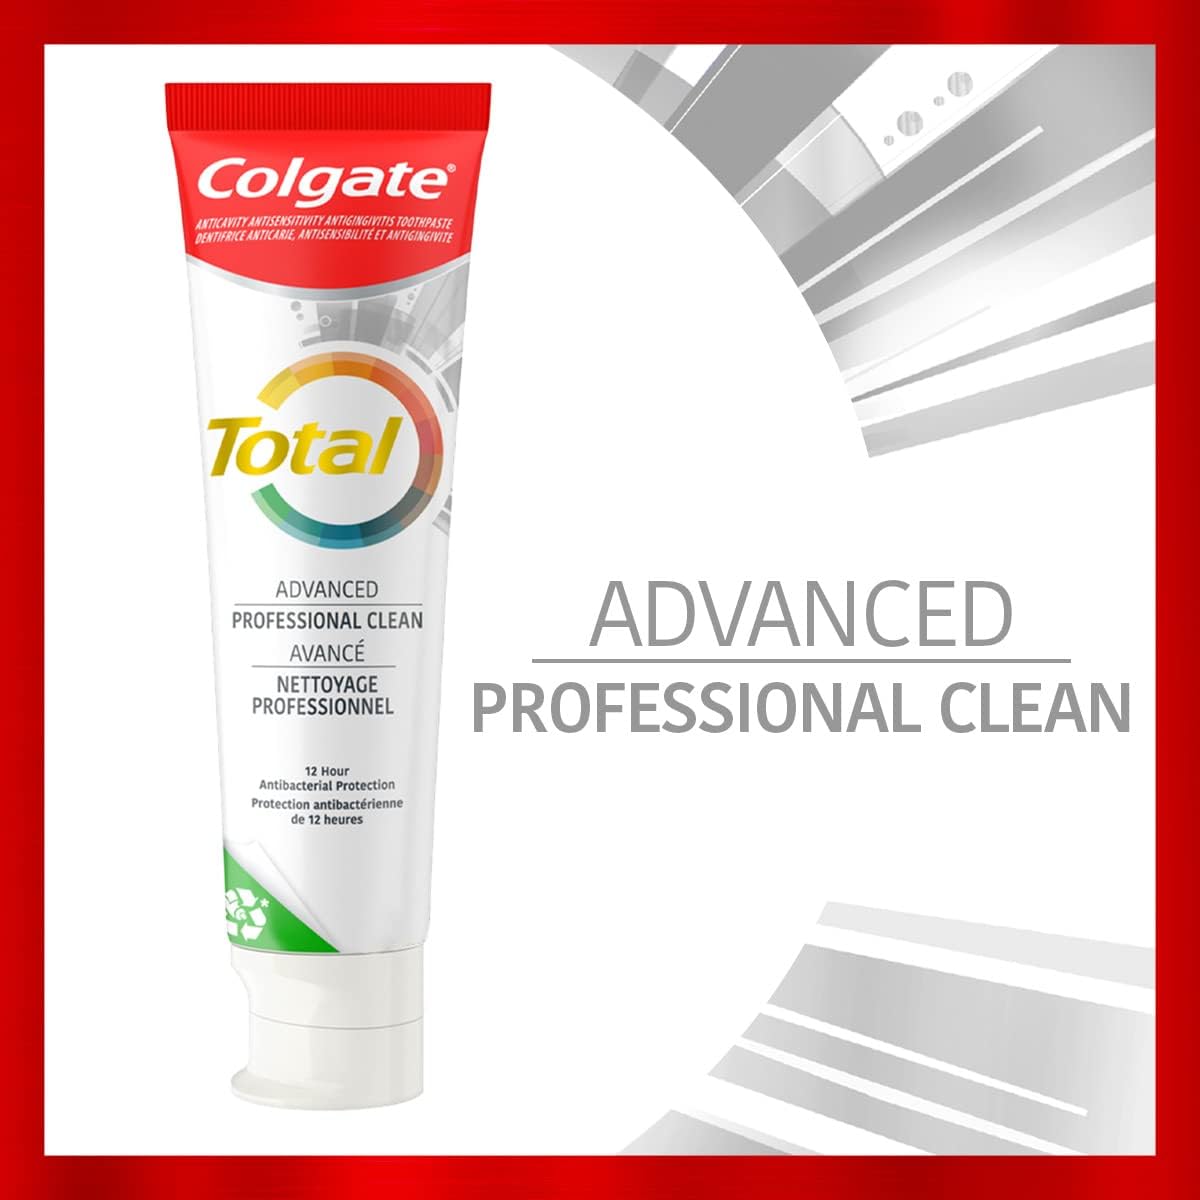 Colgate Total Care toothpaste